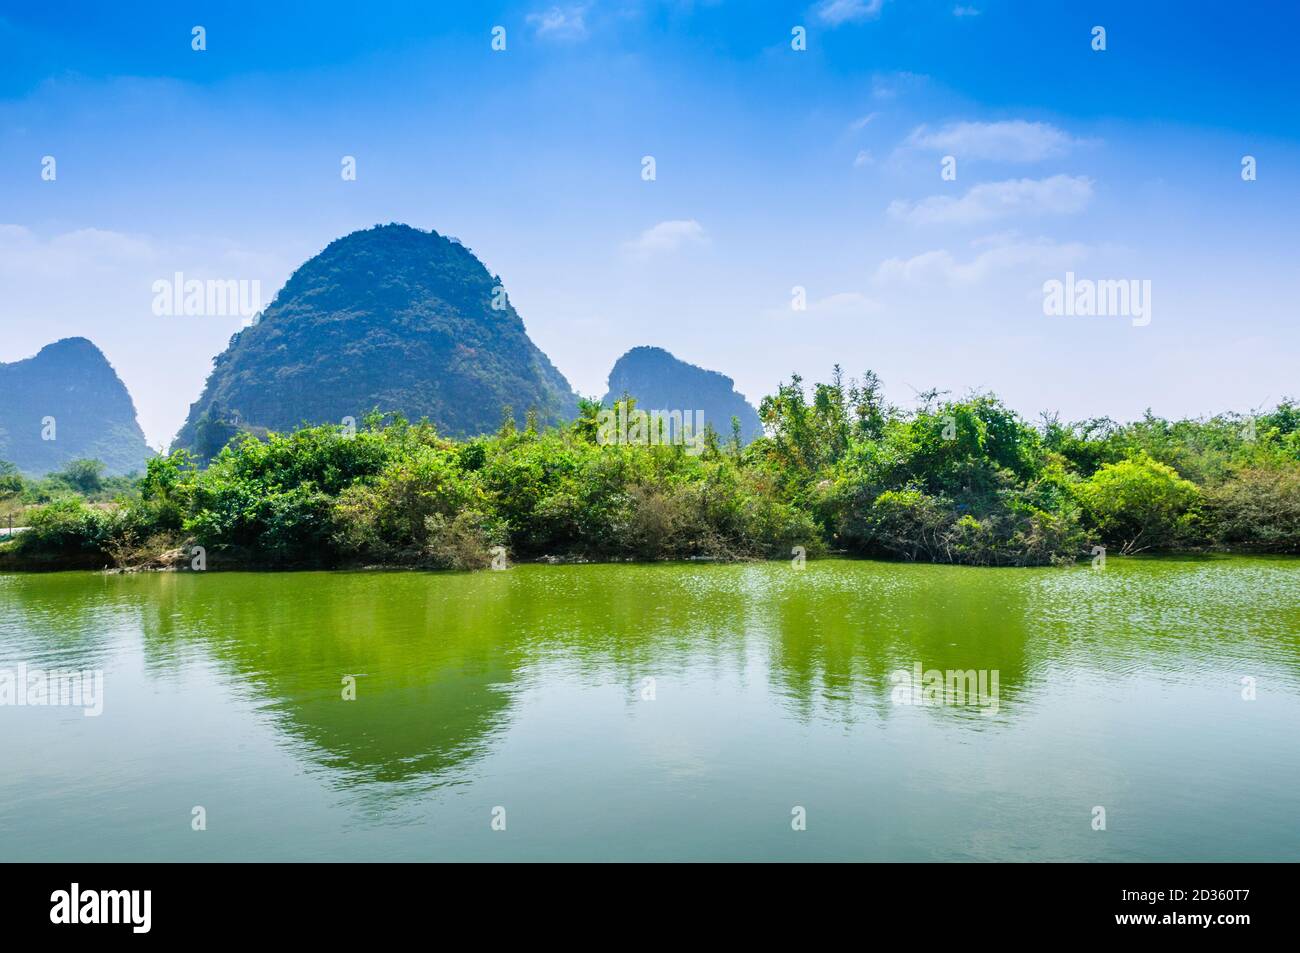 Karst mountain and river scenery Stock Photo